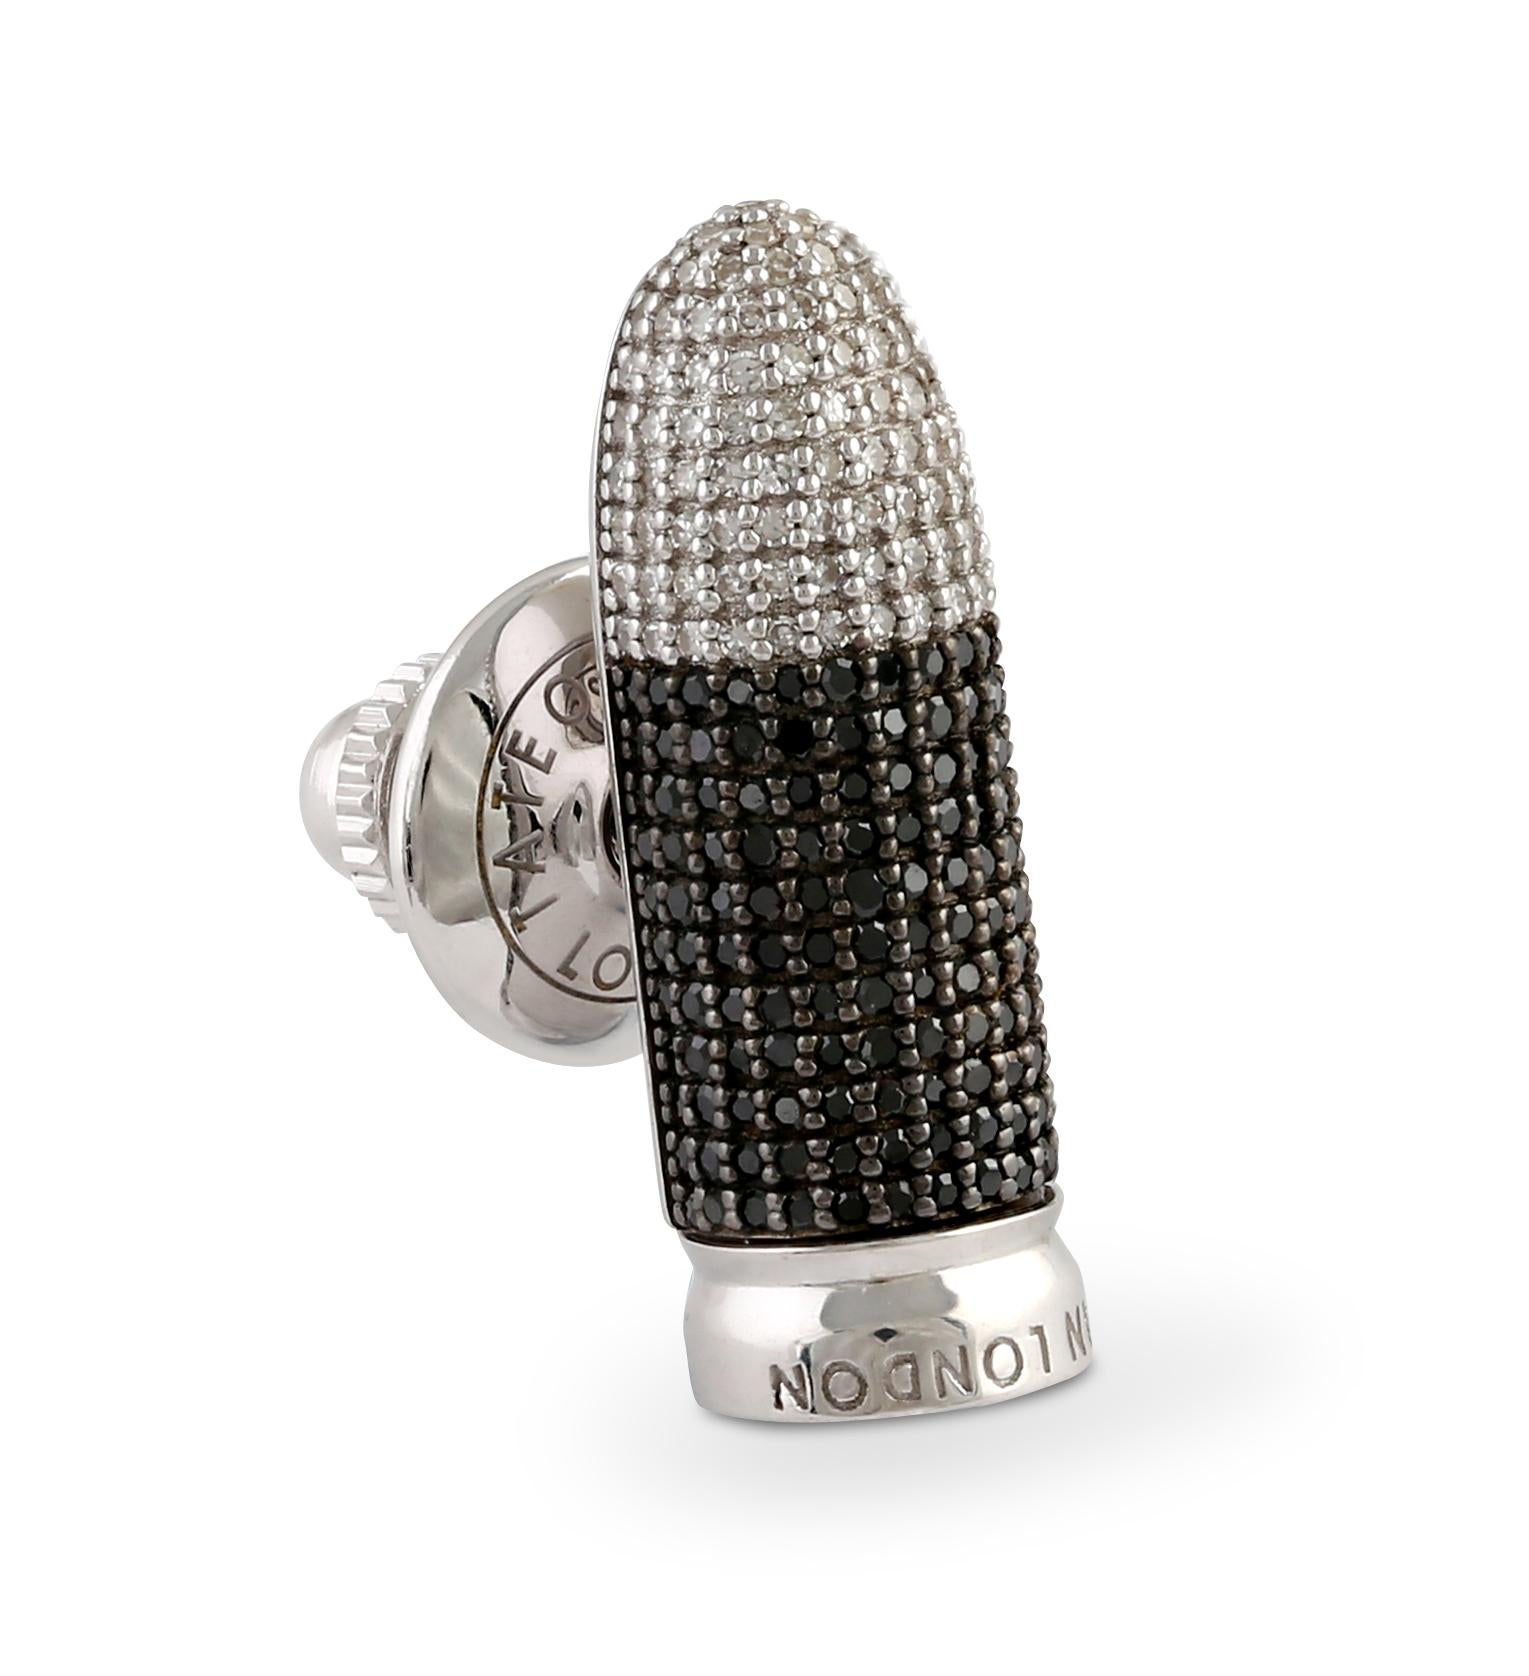 This edgy, minimalistic and uber cool design features 180 black (0.491 cts), and 95 white (0.234 cts) pave diamonds, covering the entire surface of the bullet. This glamorous pin is the epitome of luxury and a perfect companion when you want to make